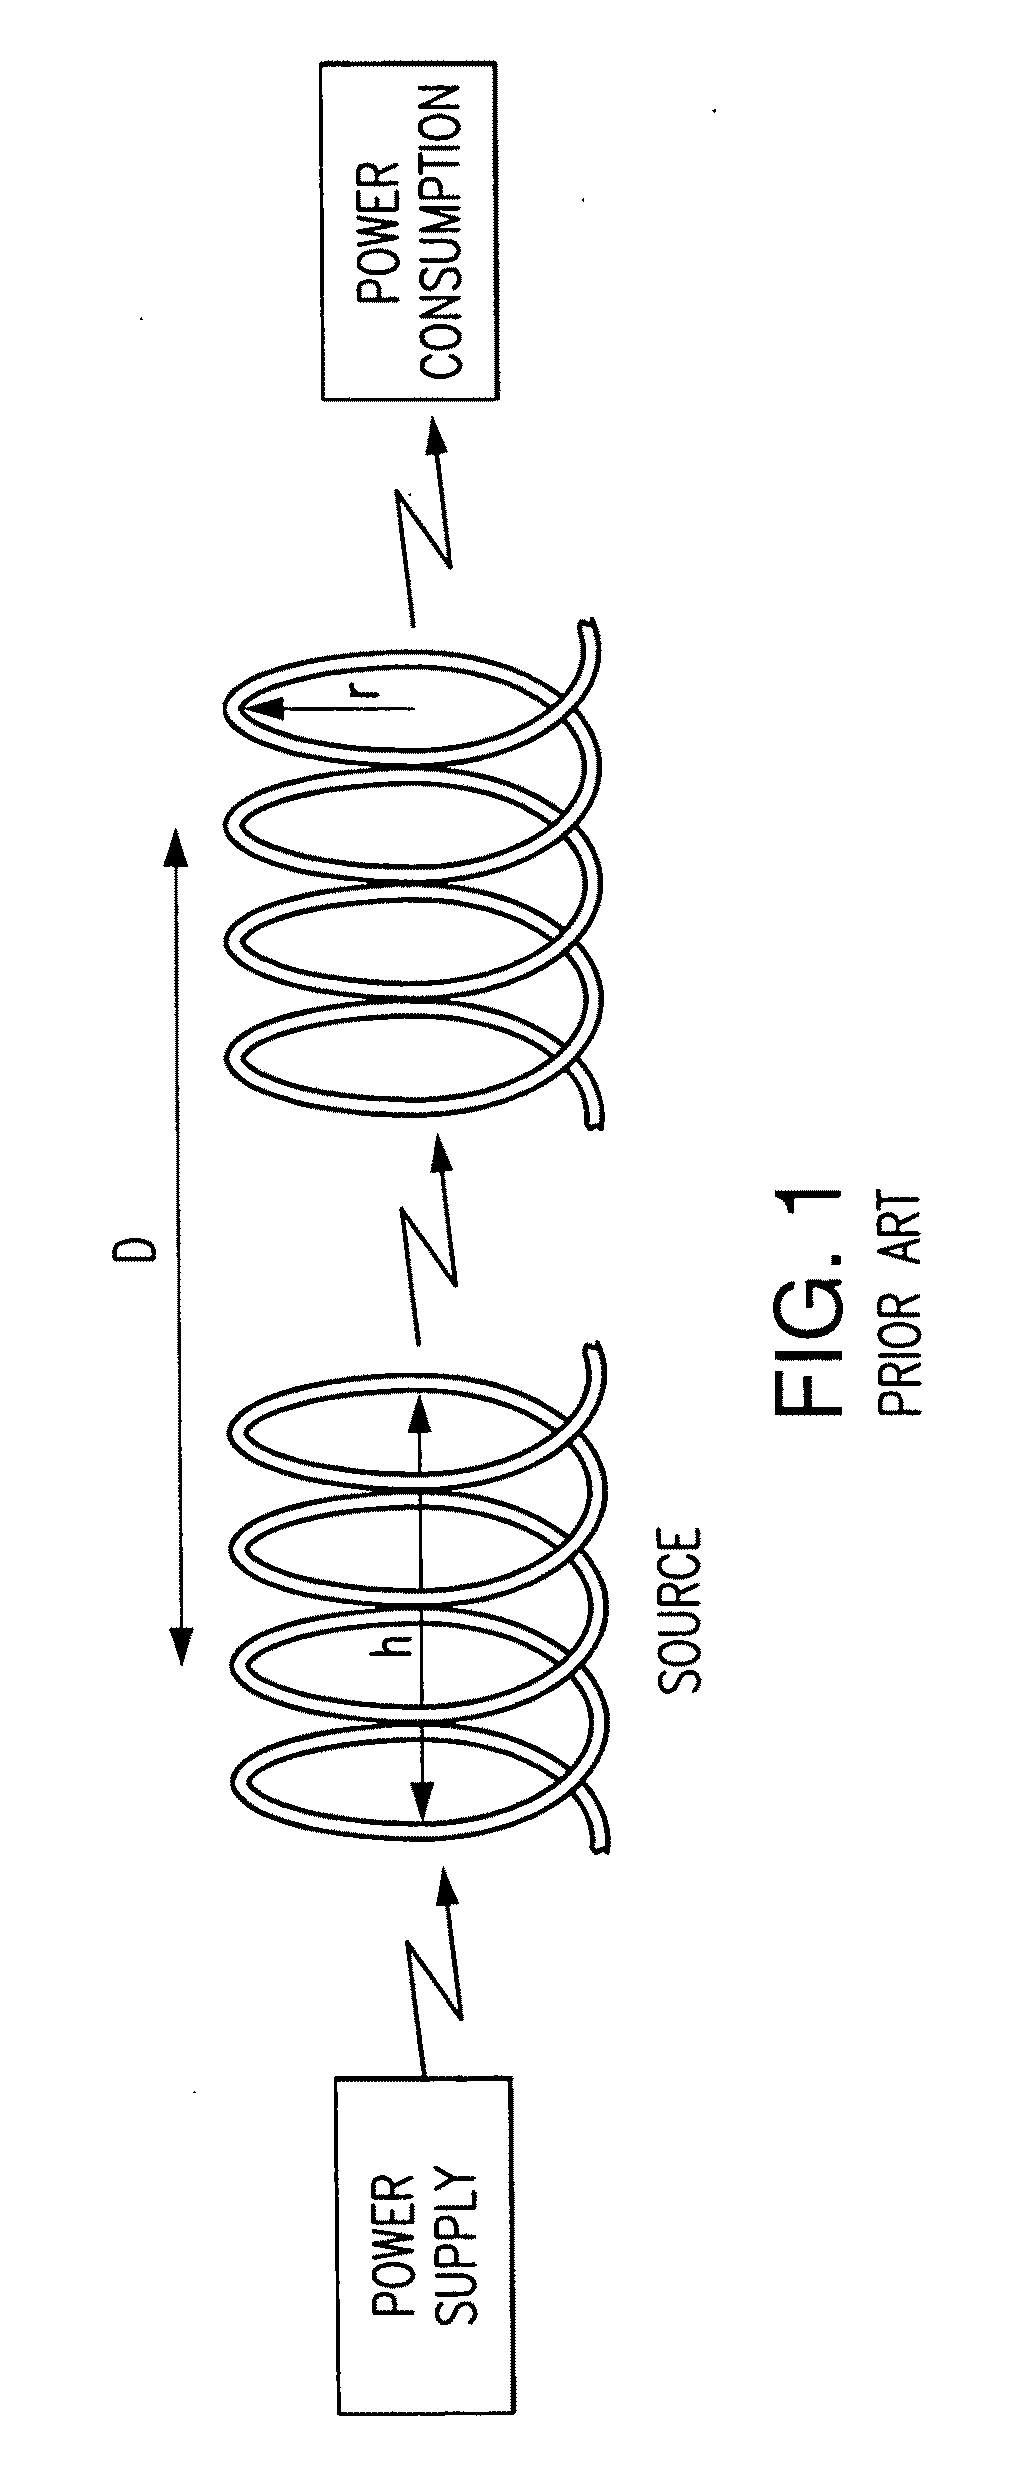 Method and system for long range wireless power transfer